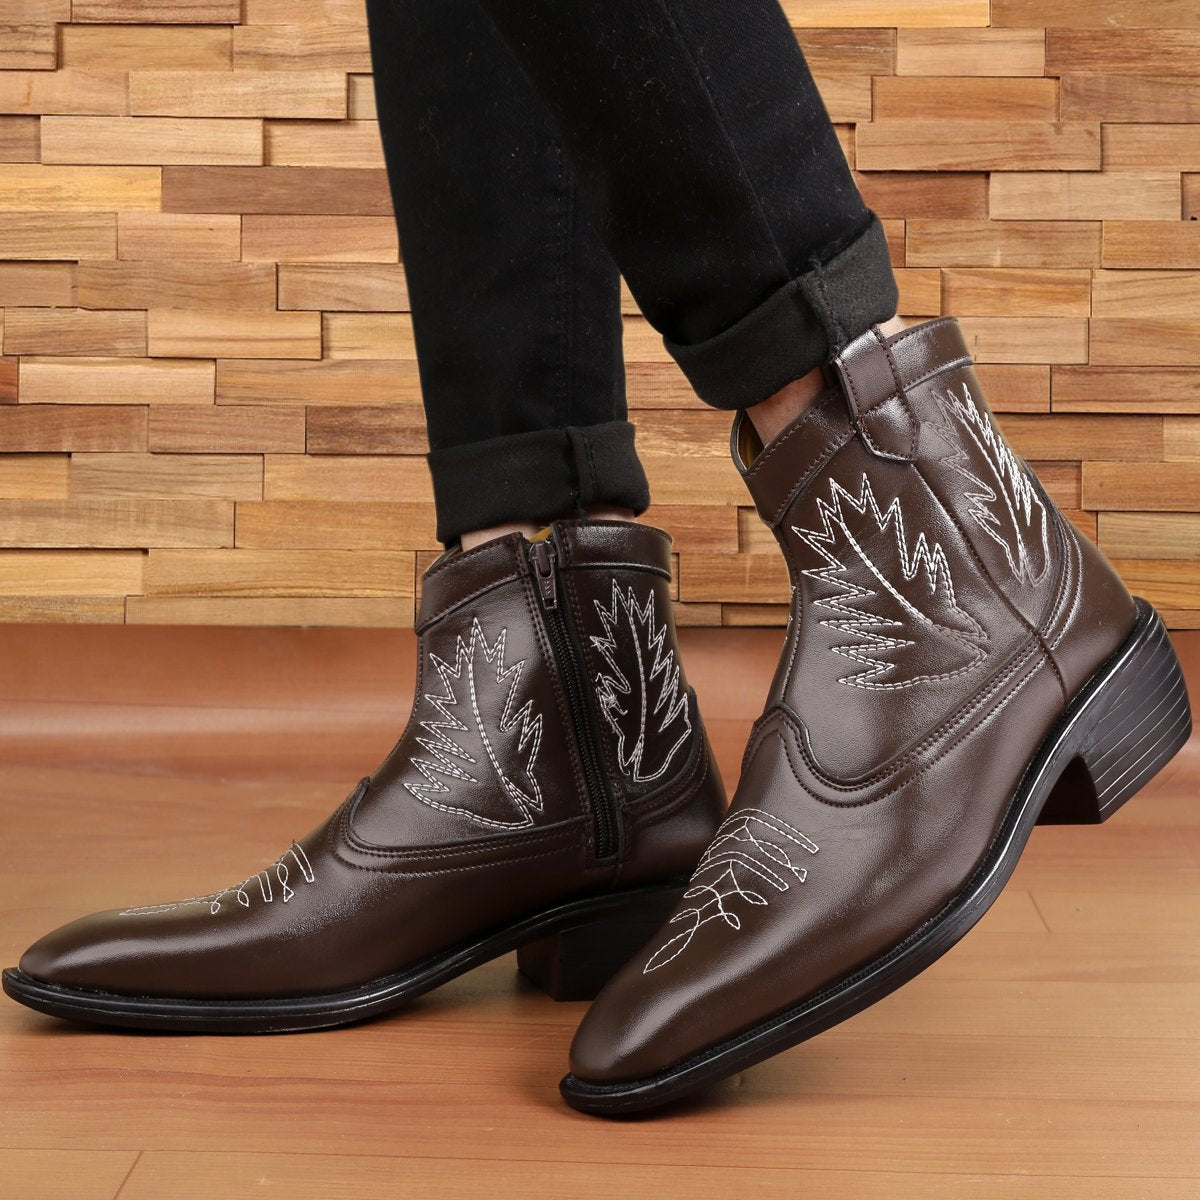 Jack Marc New Men's Formal and Casual Retro Brown Boots - JACKMARC.COM